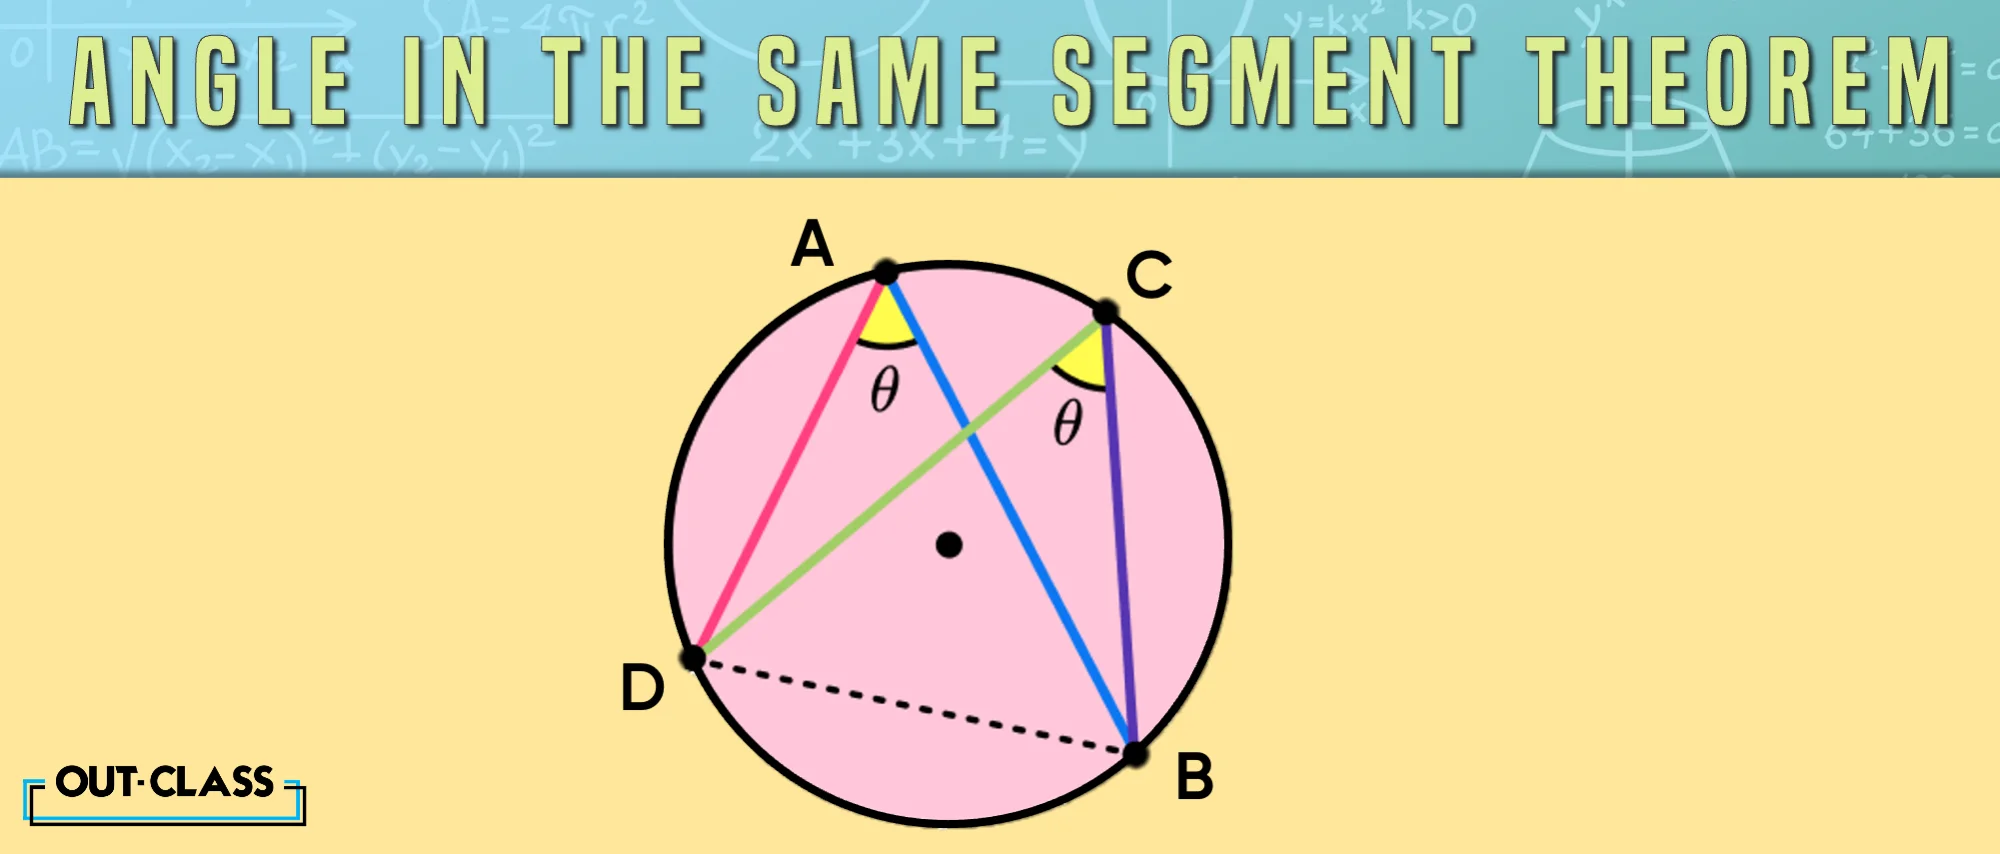 One property of a circle is the angle in the same circle segment theorem.